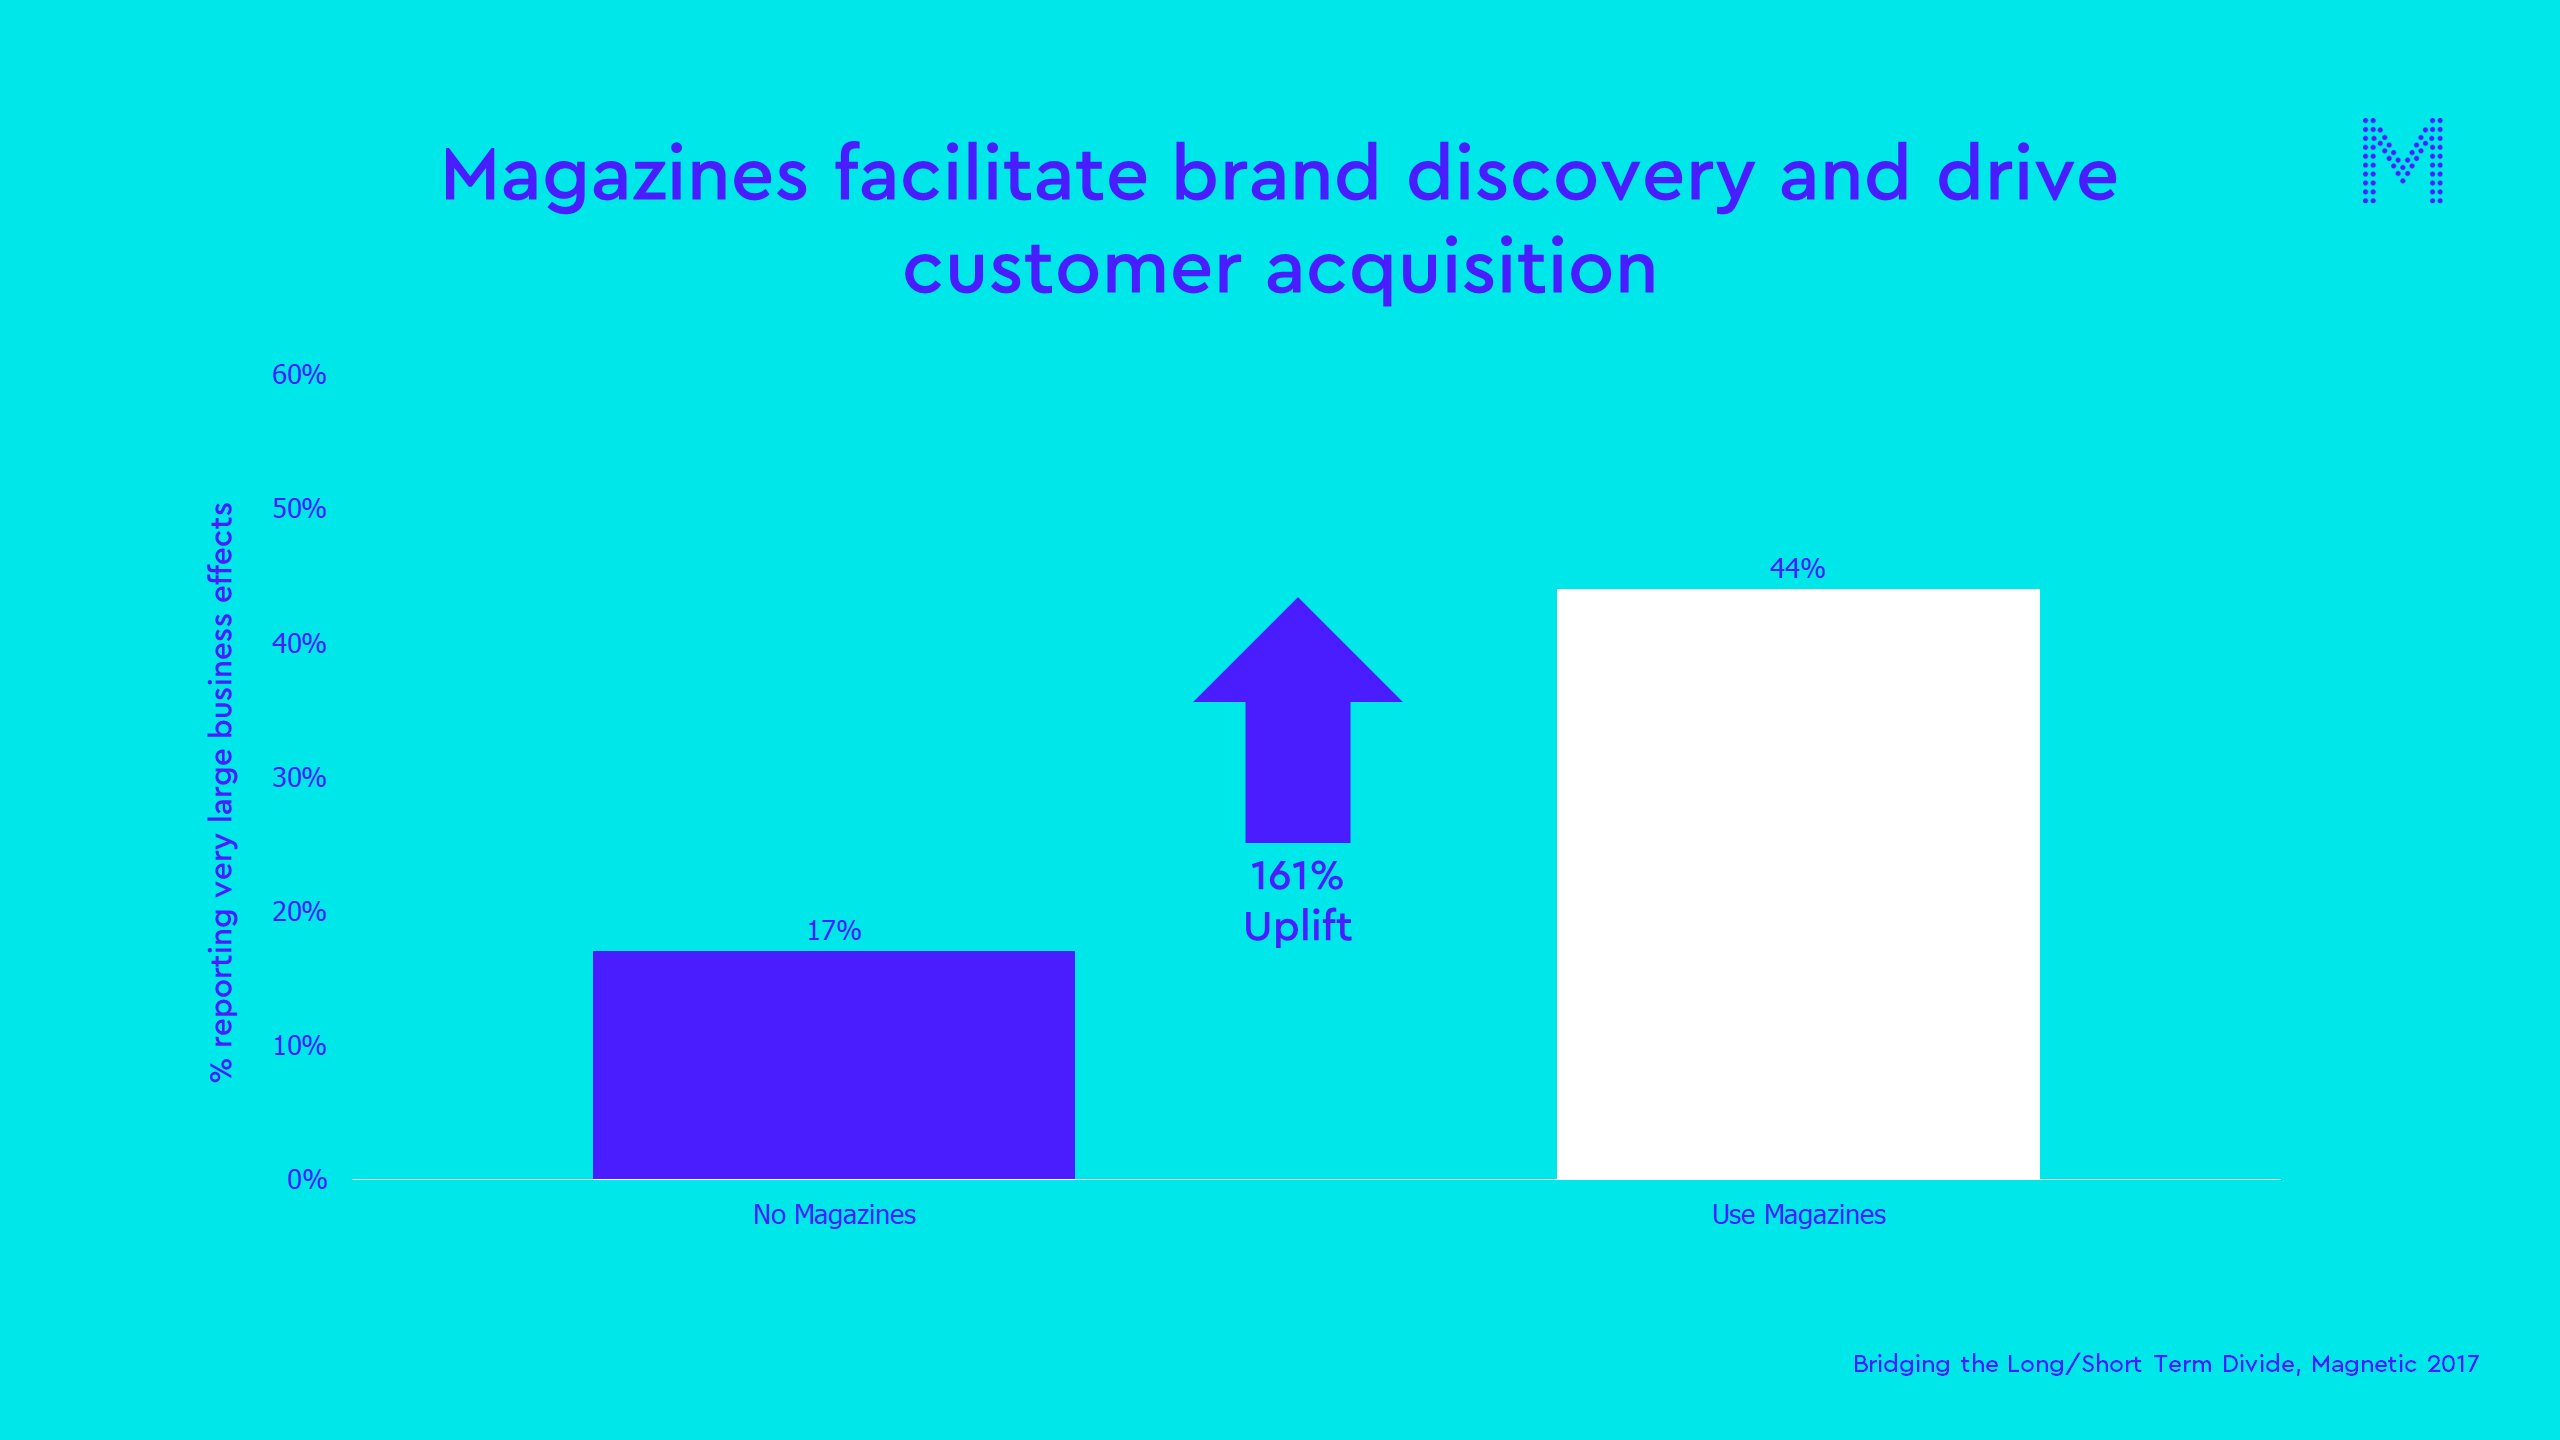 Magazines facilitate brand discovery and drive customer acquisition